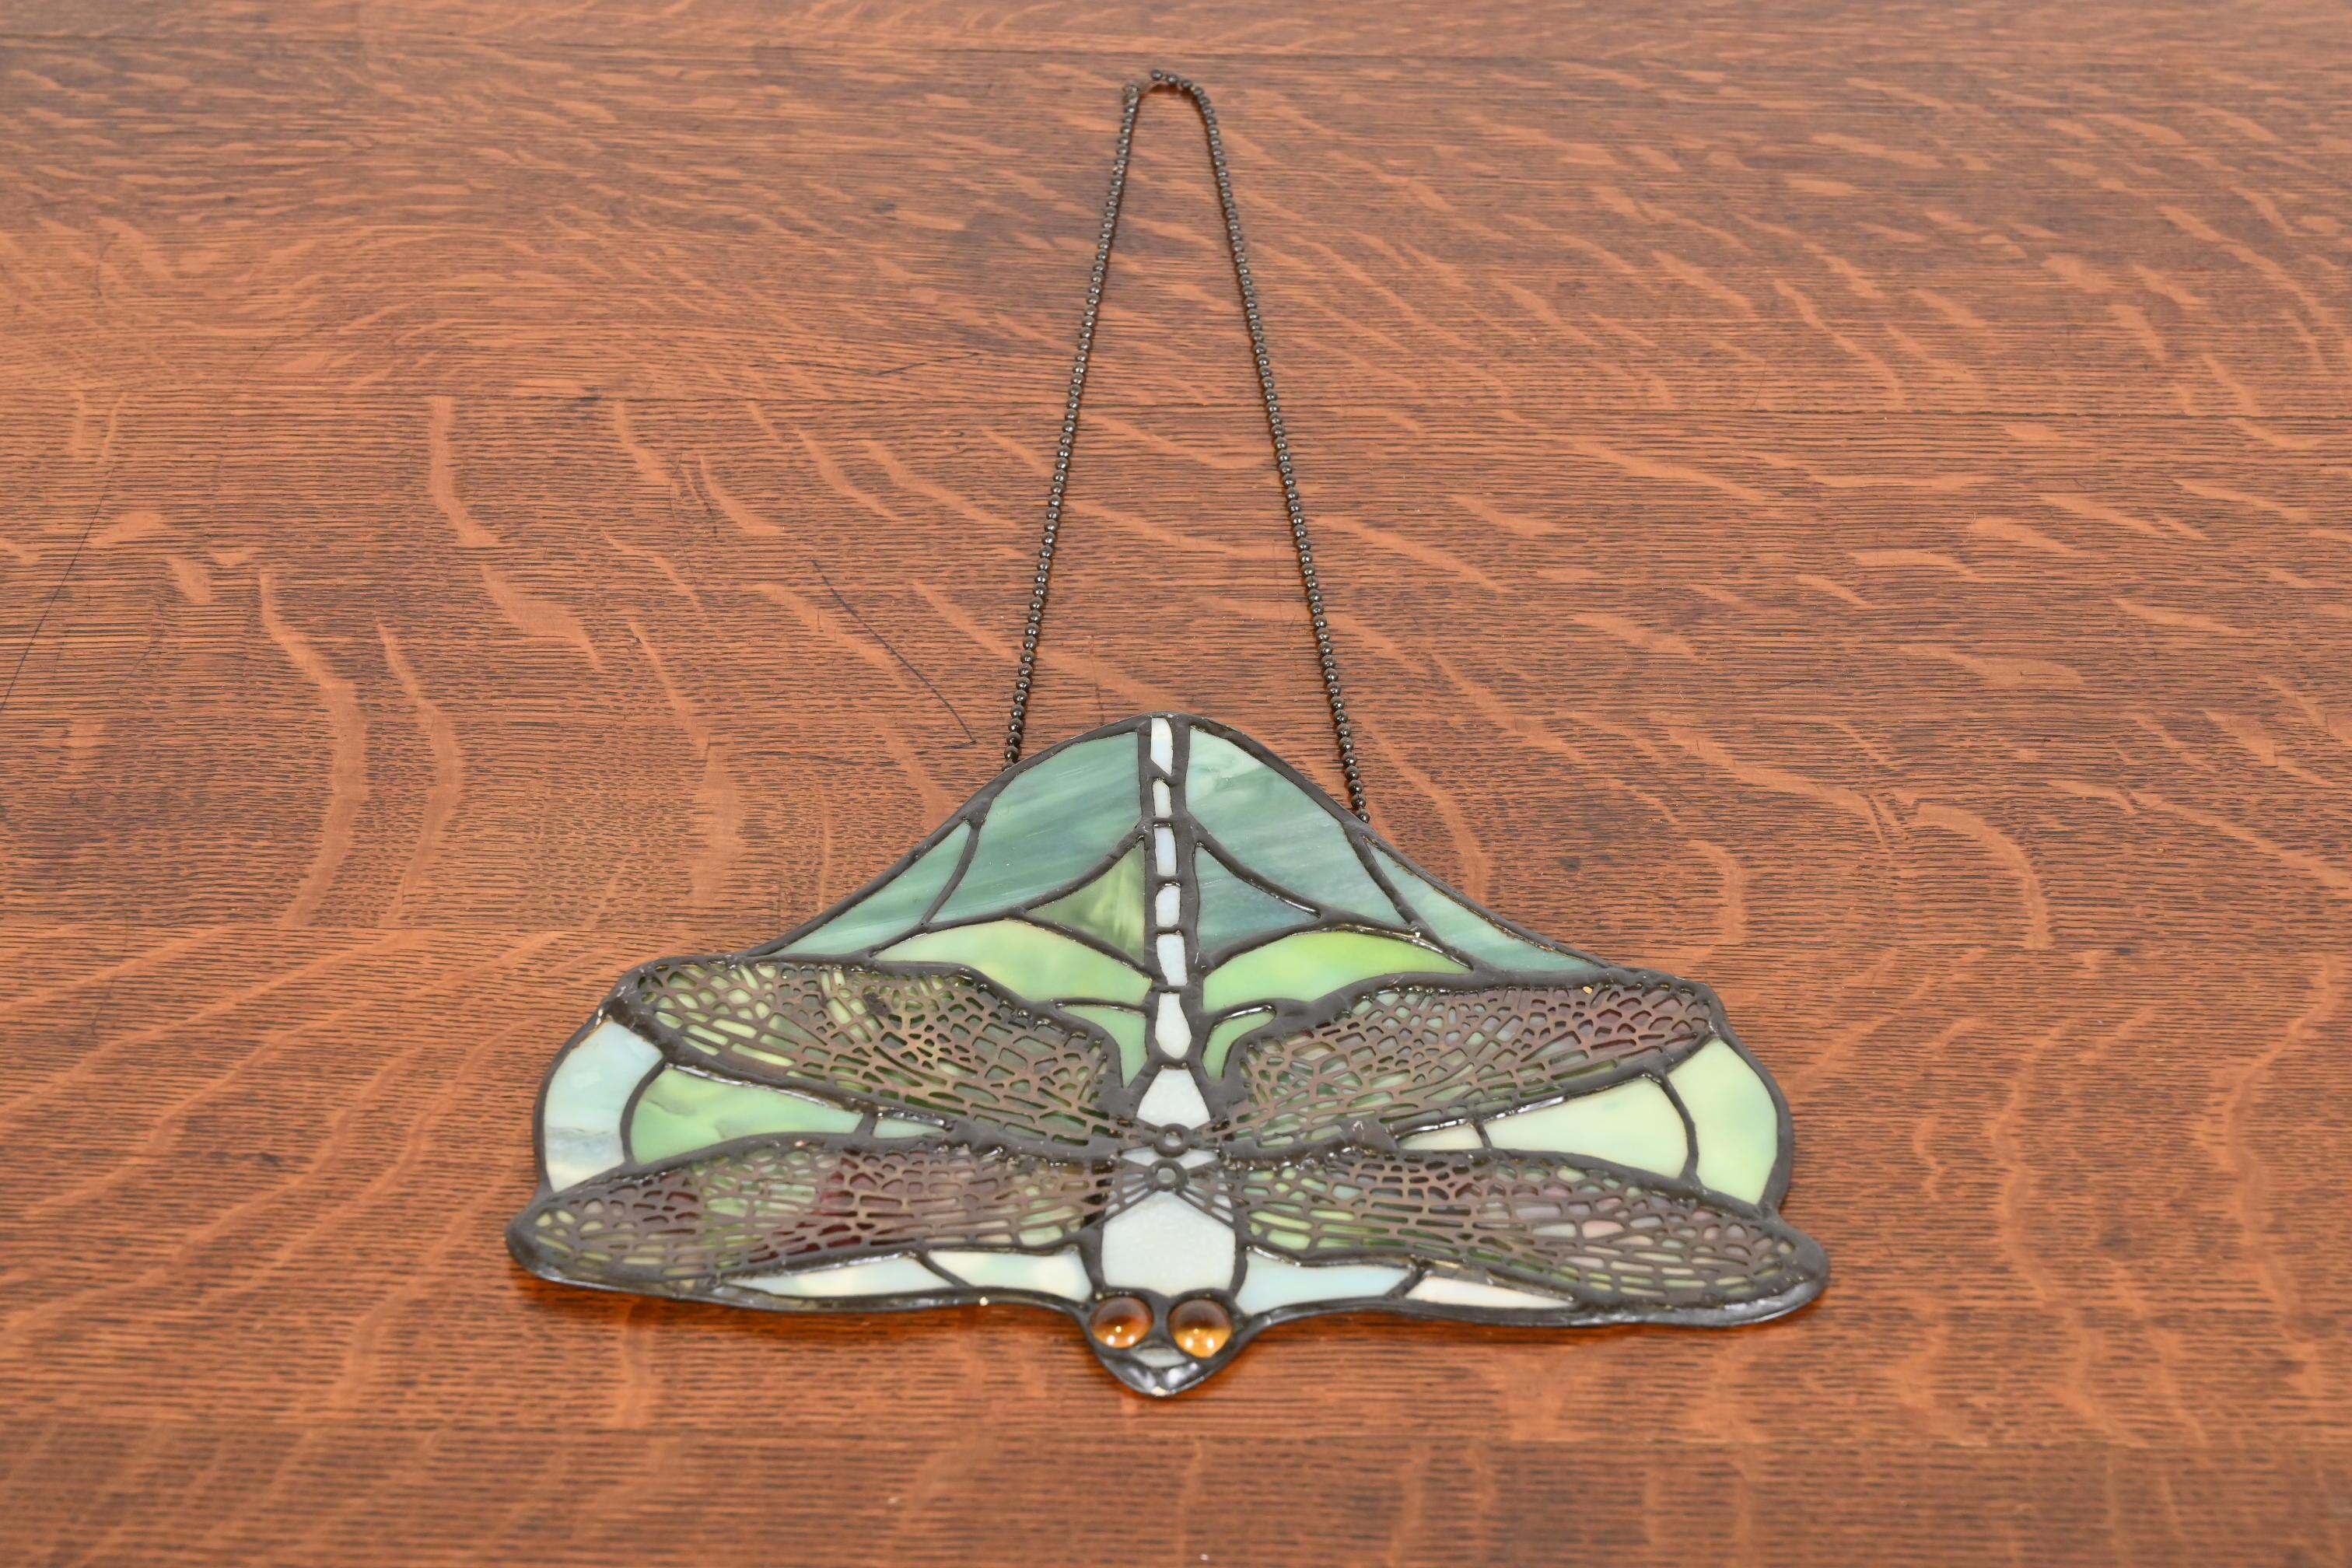 American Arts & Crafts Dragonfly Stained Glass Lamp Screen Pendant After Tiffany Studios